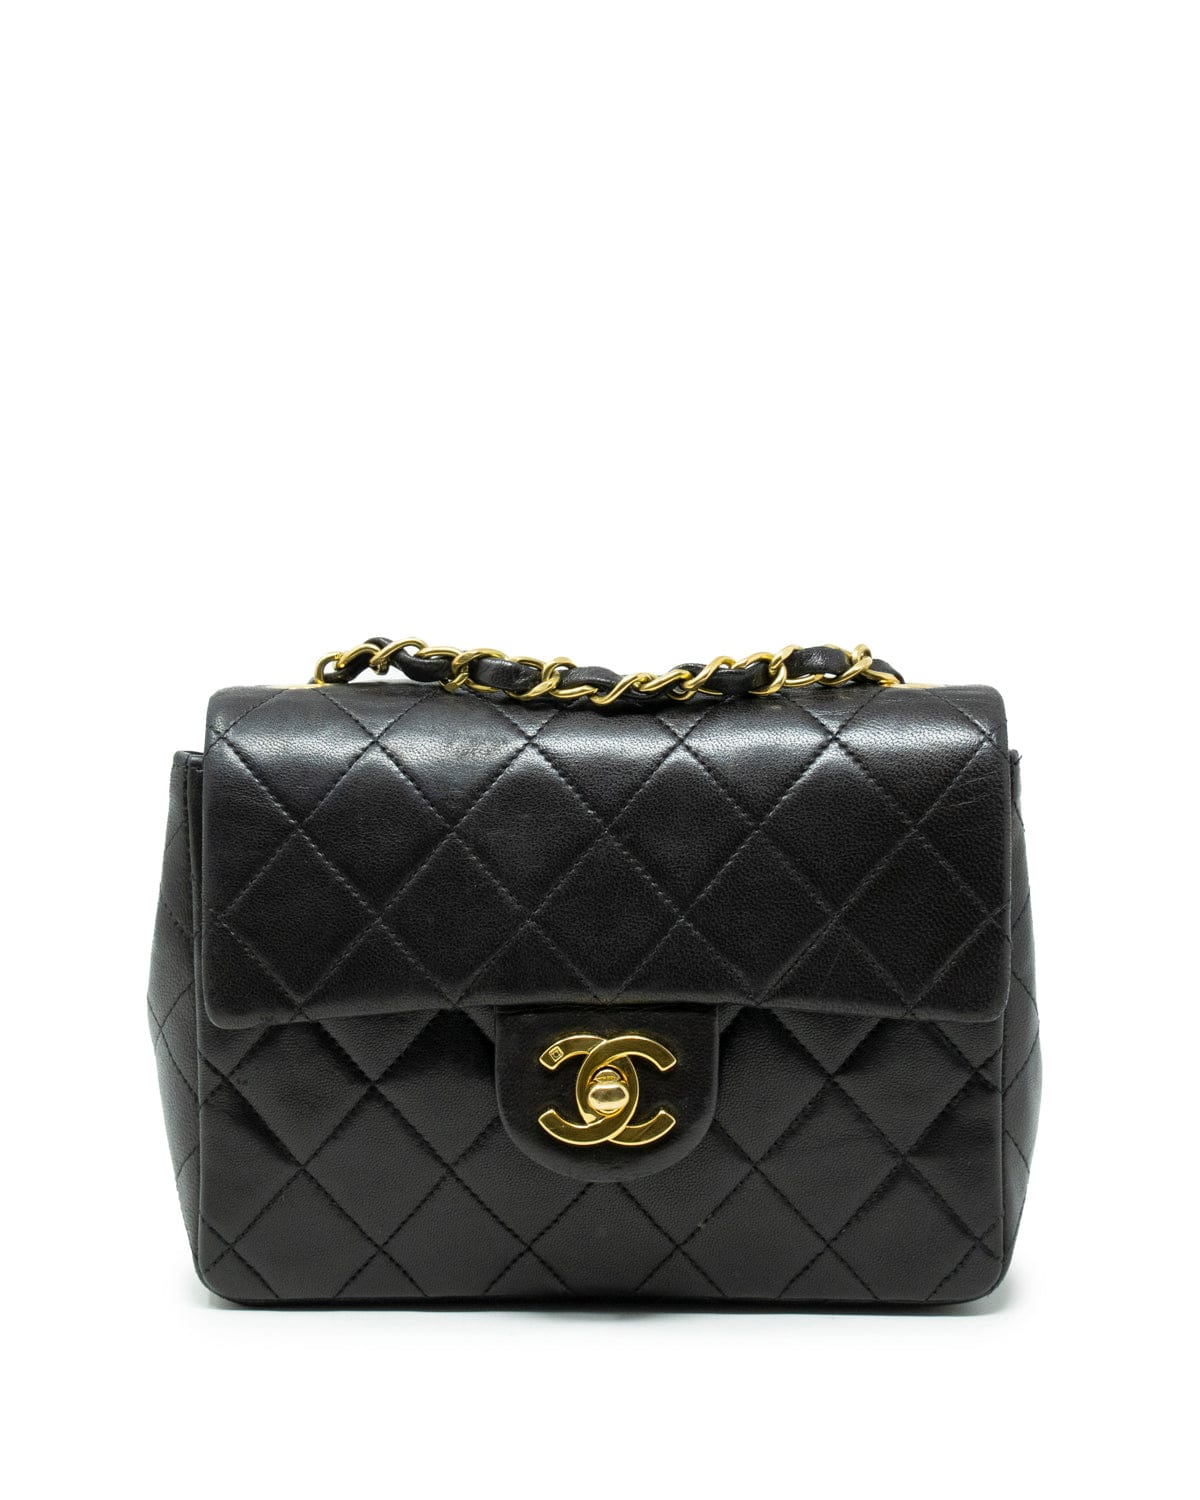 WAYS TO AUTHENTICATE A CHANEL CLASSIC FLAP BAG 